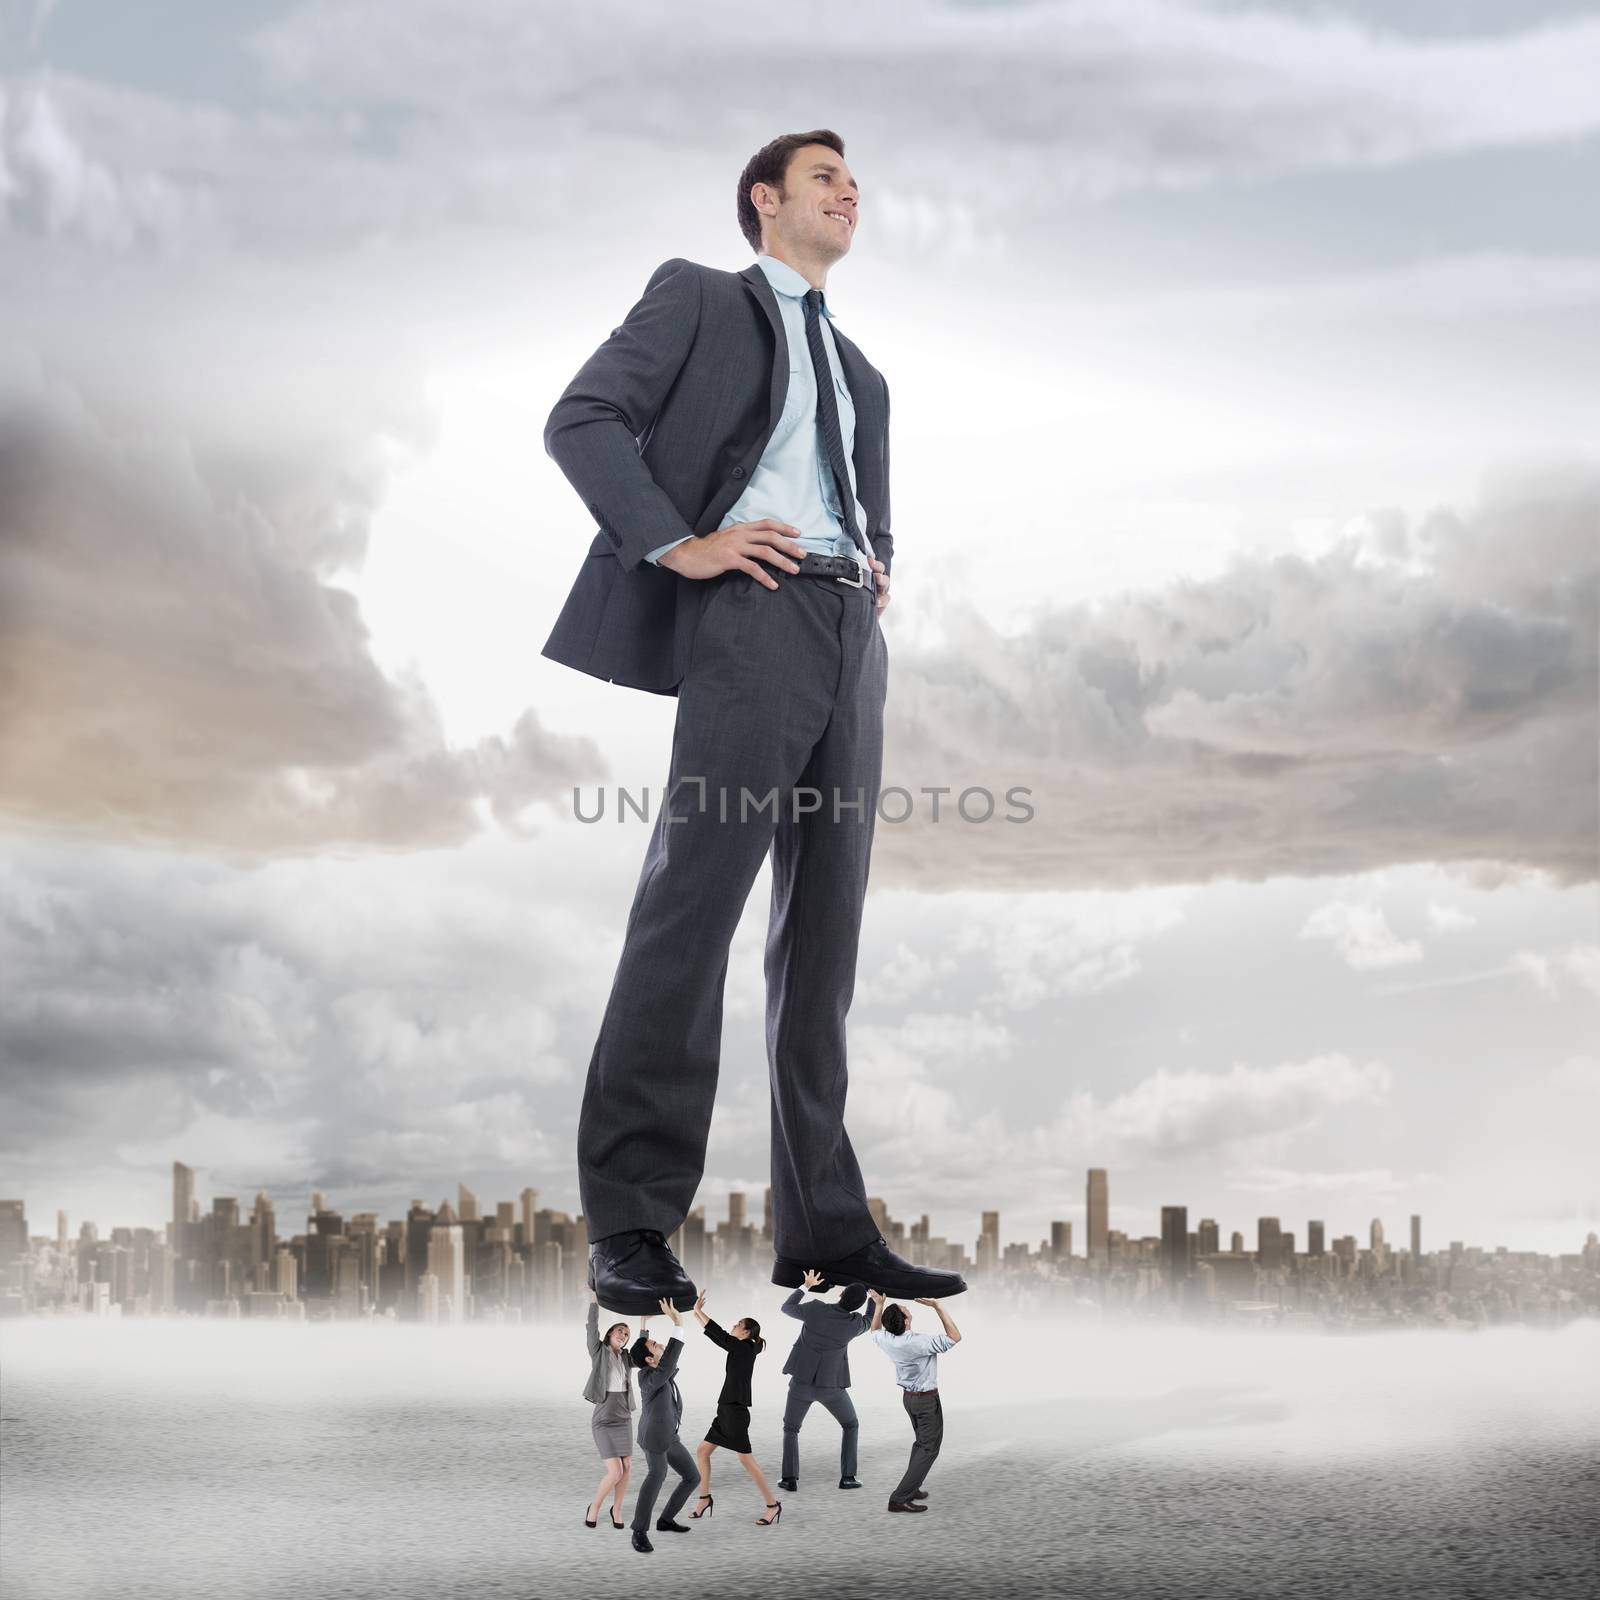 Business team supporting boss against large city on the horizon